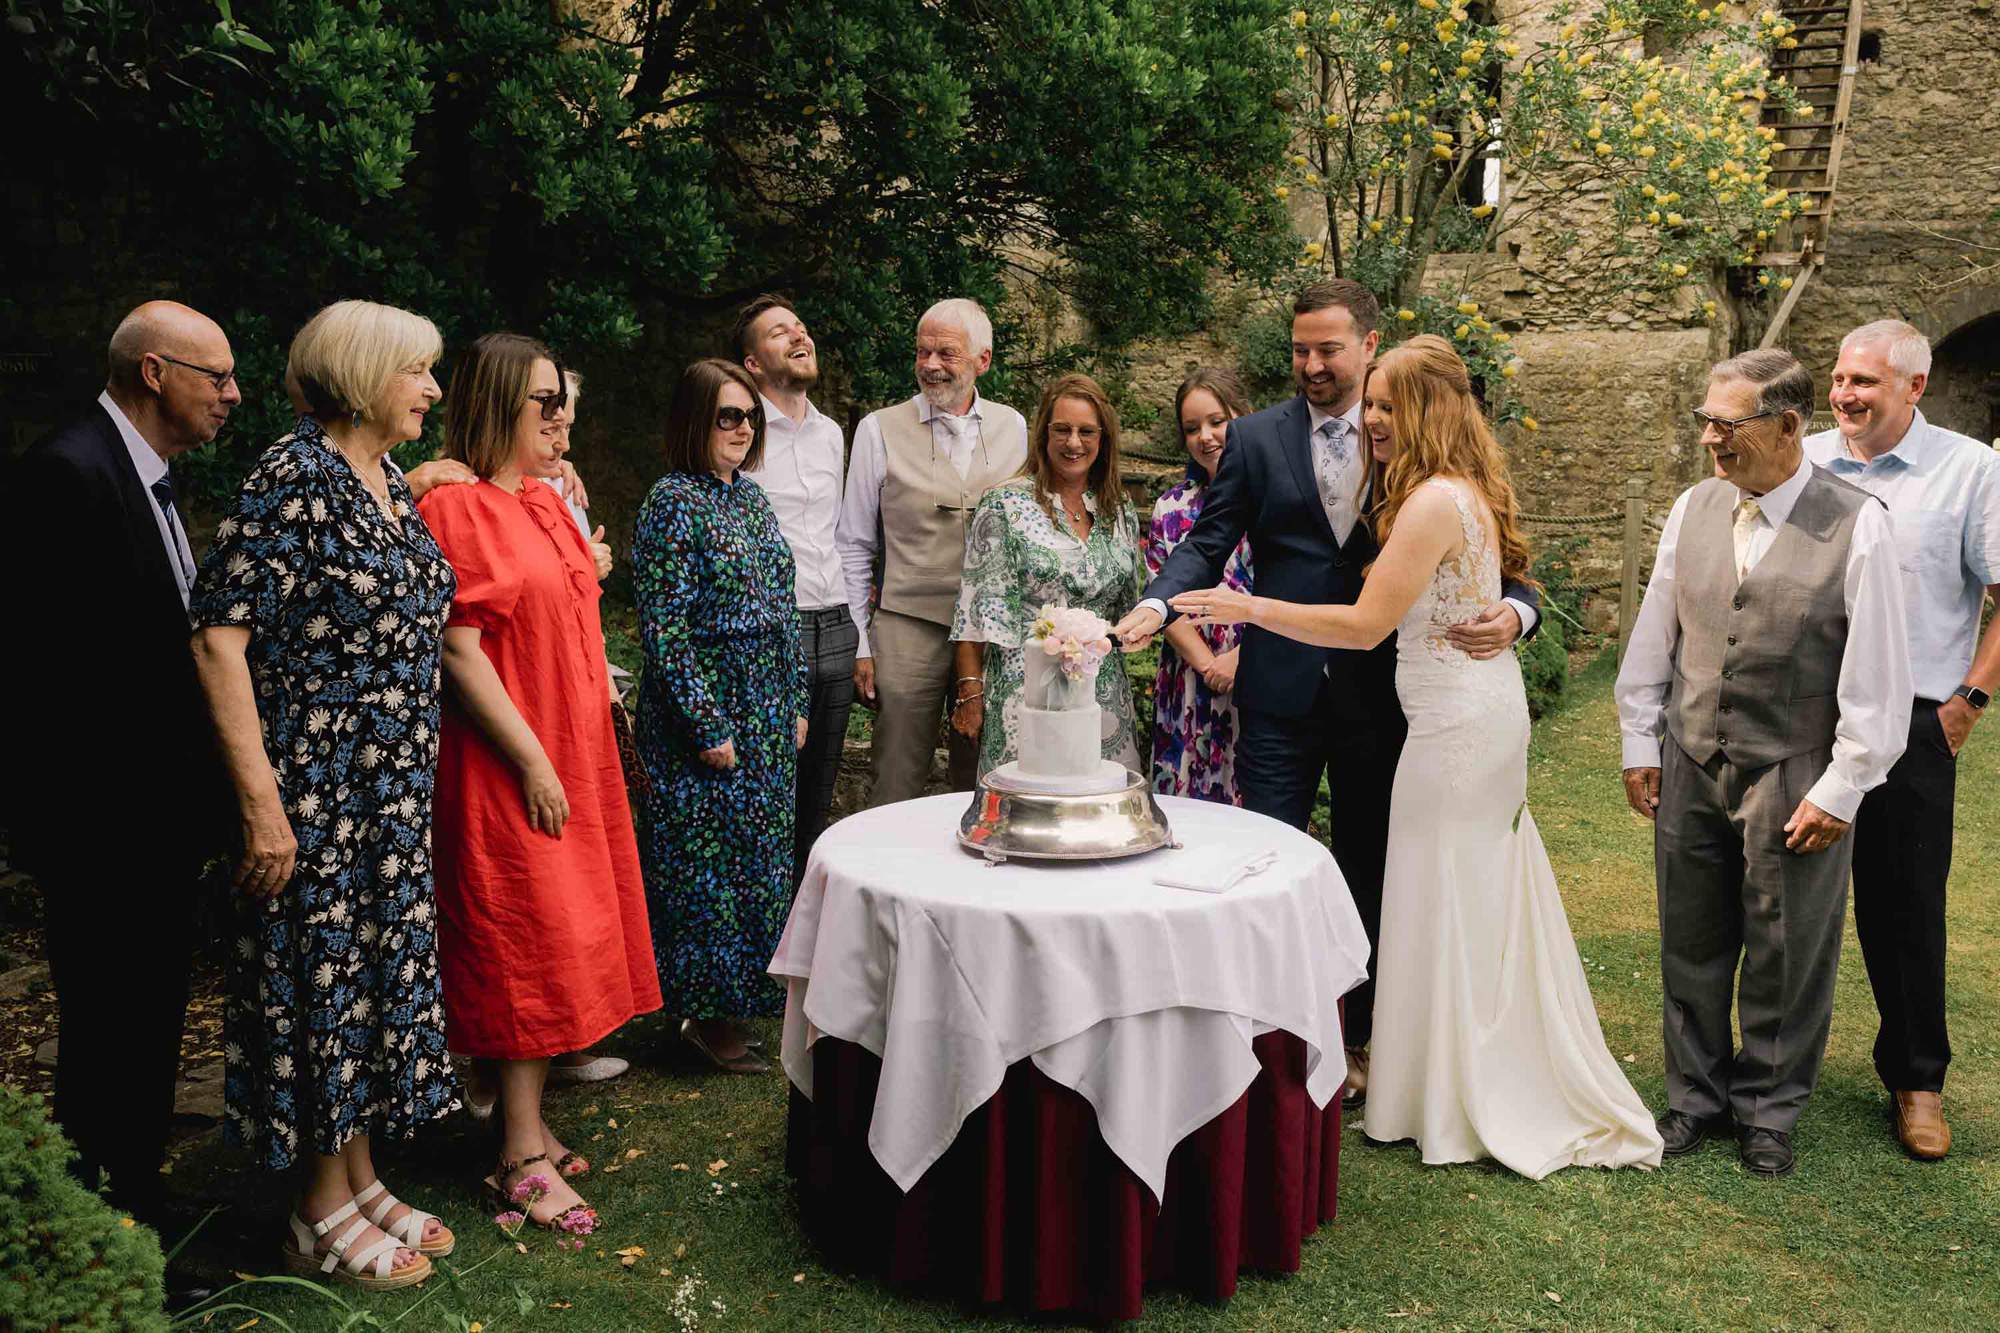 Bride and groom cut the cake at Amberley Castle in West Sussex.